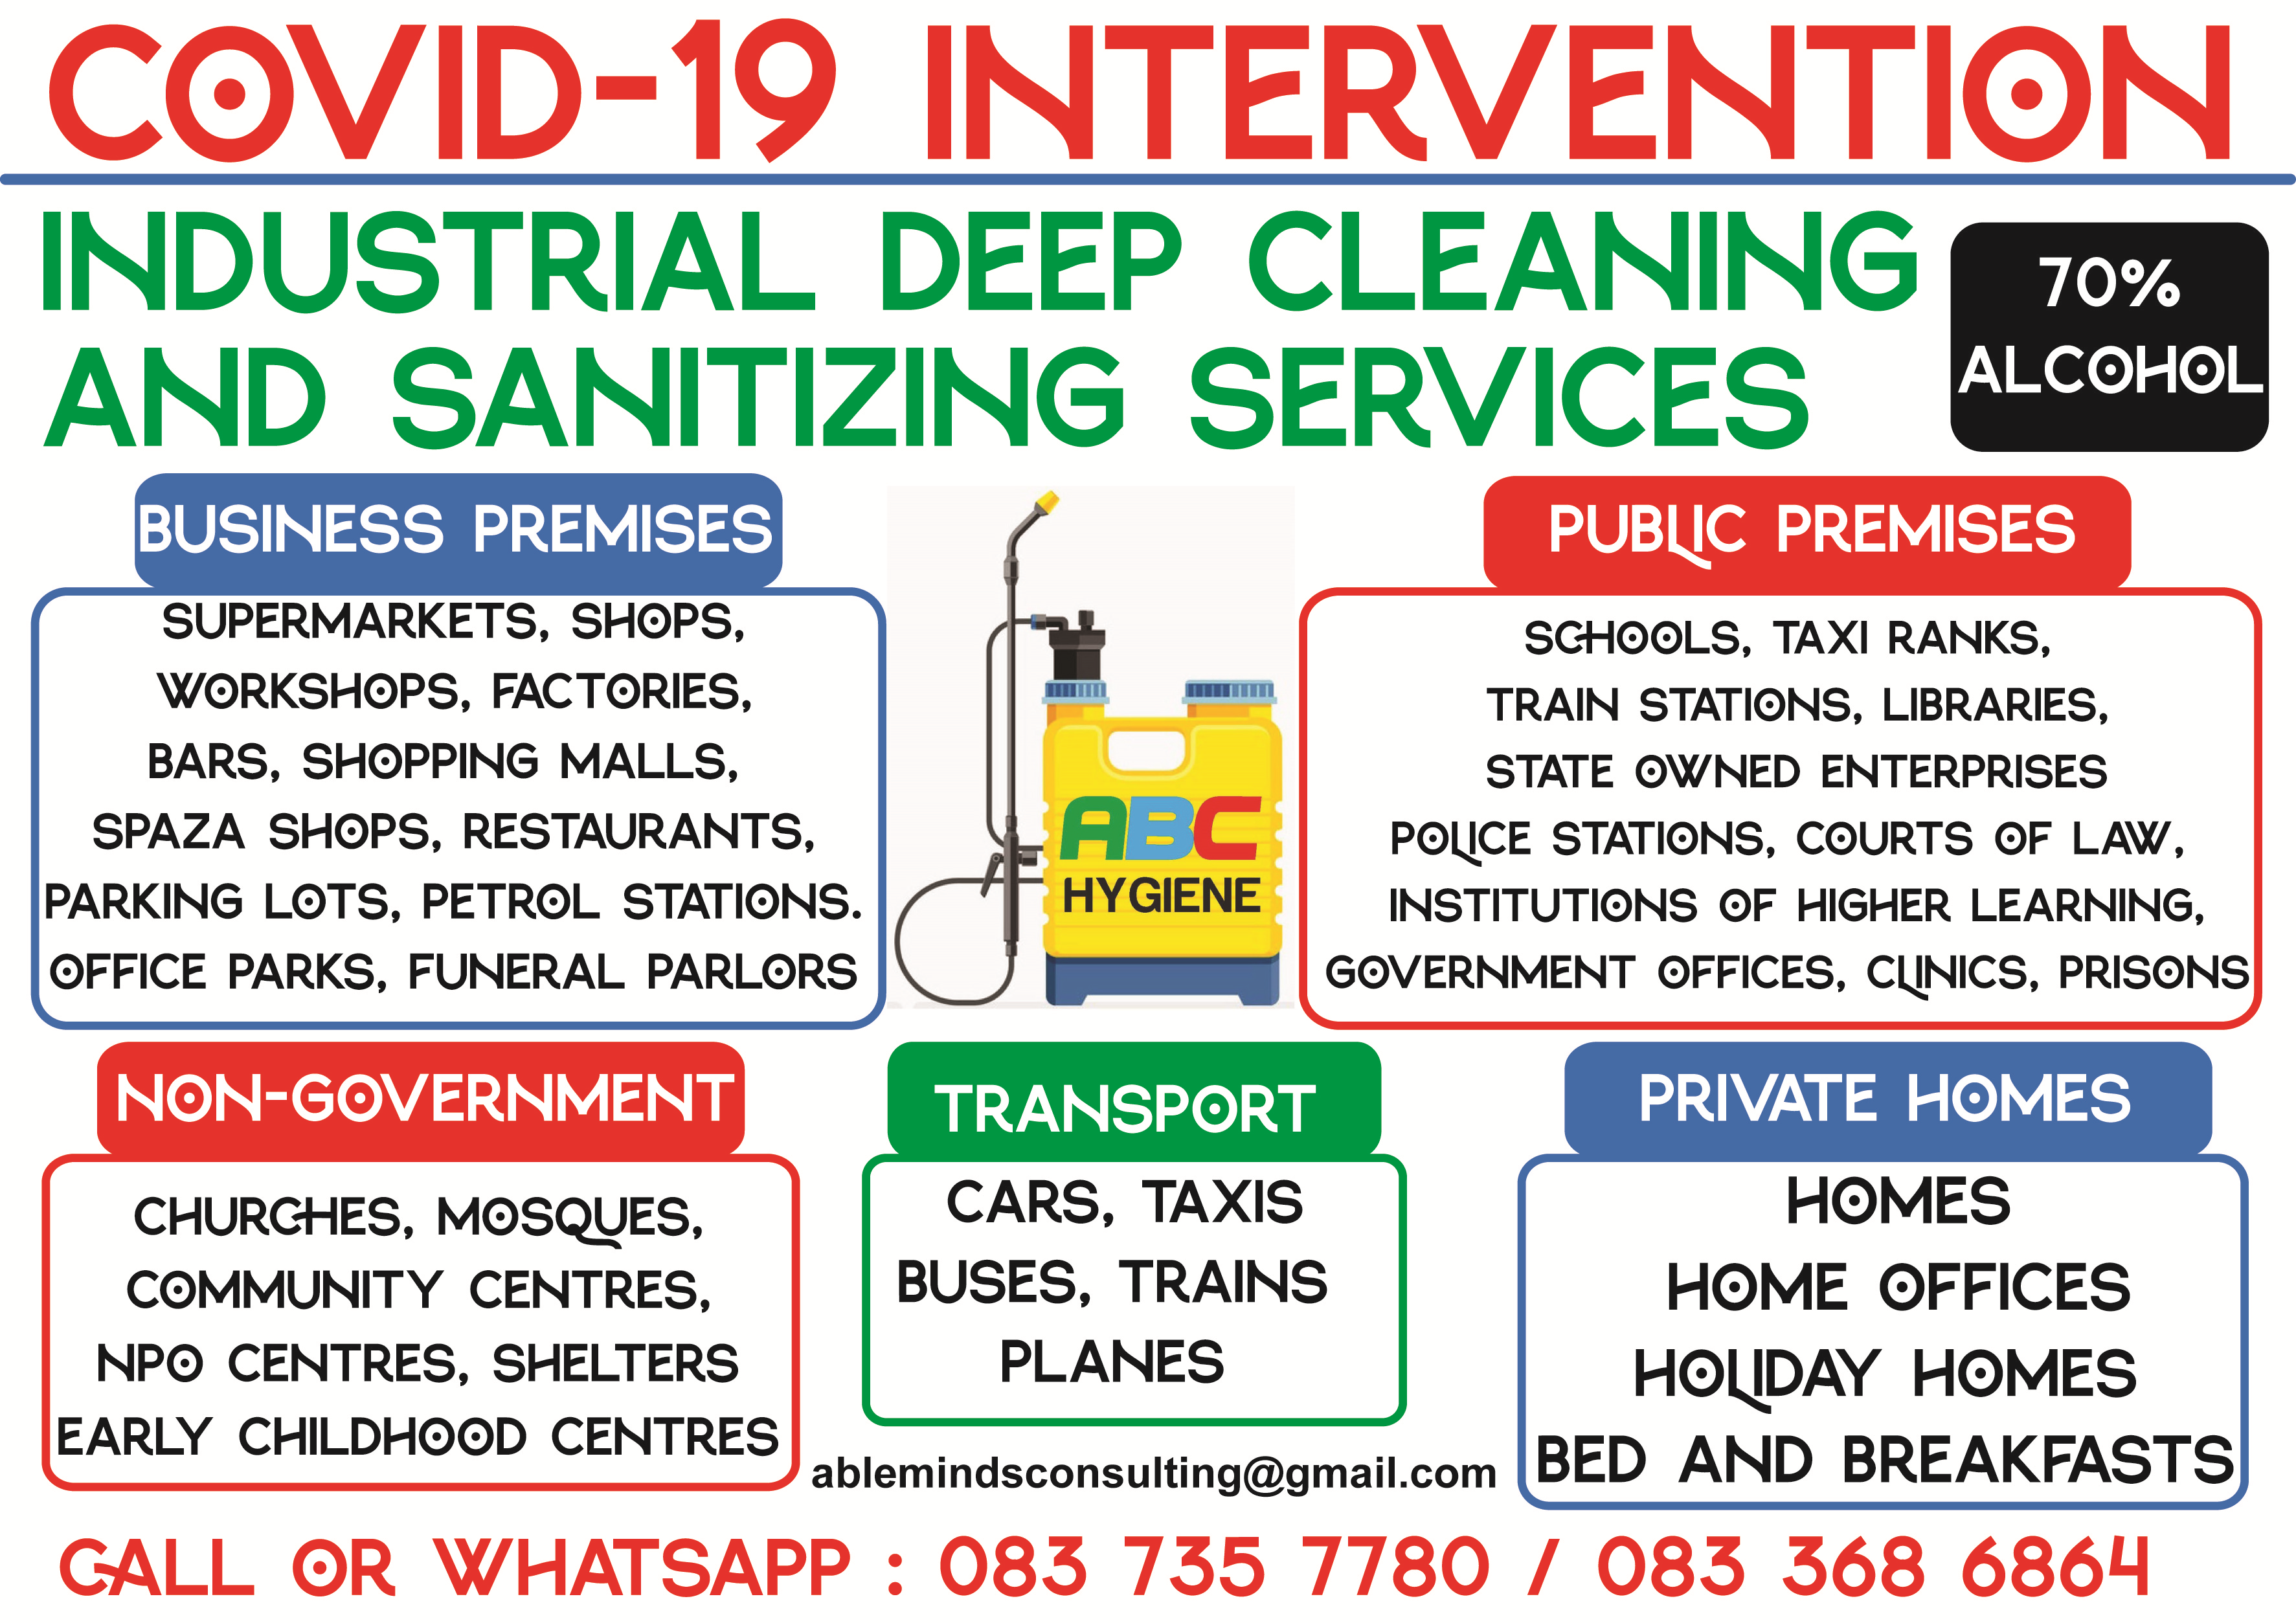 INDUSTRIAL DEEP CLEANING AND SANITIZING (COVID-19) - GAUTENG - NORTH-WEST - FREE-STATE